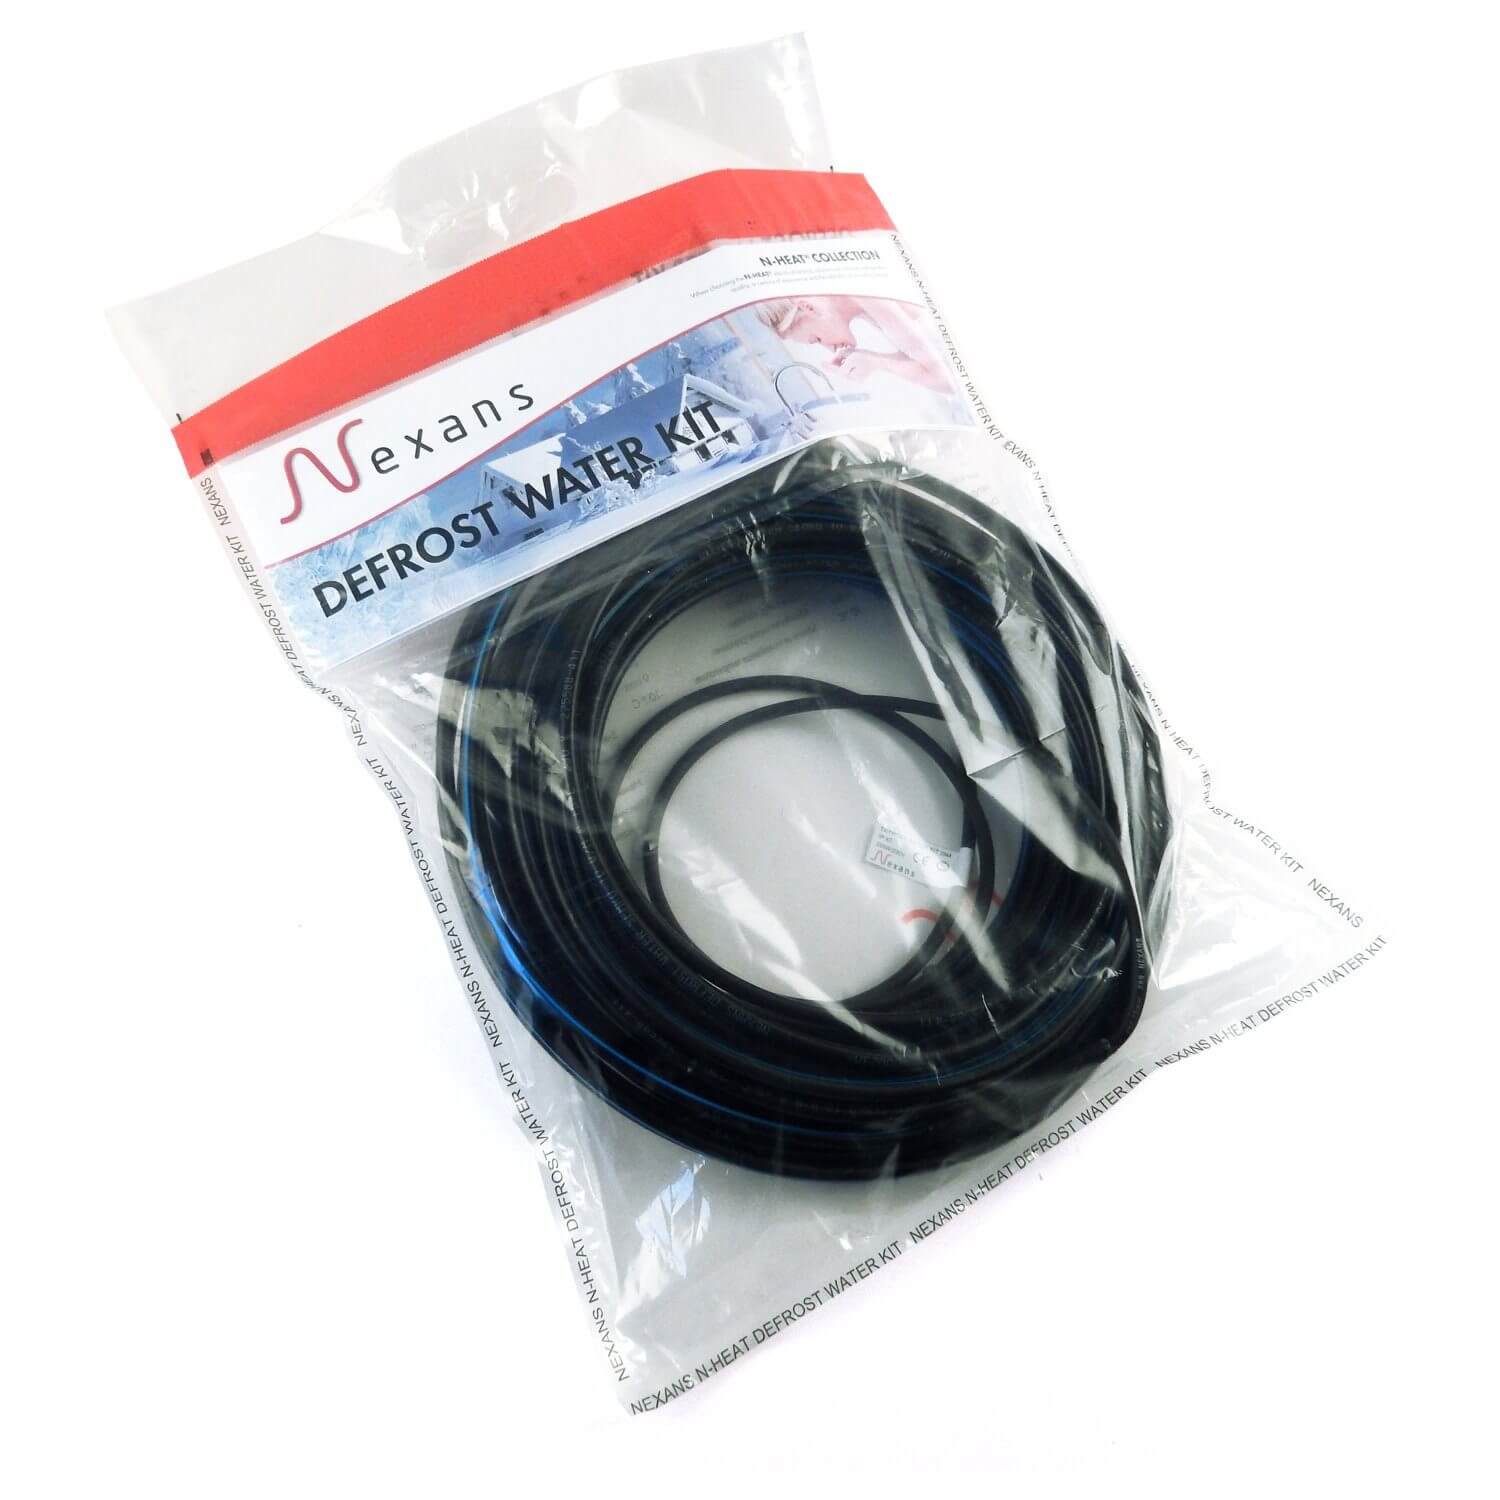 defrost water kit 15m 1037314 1 393935